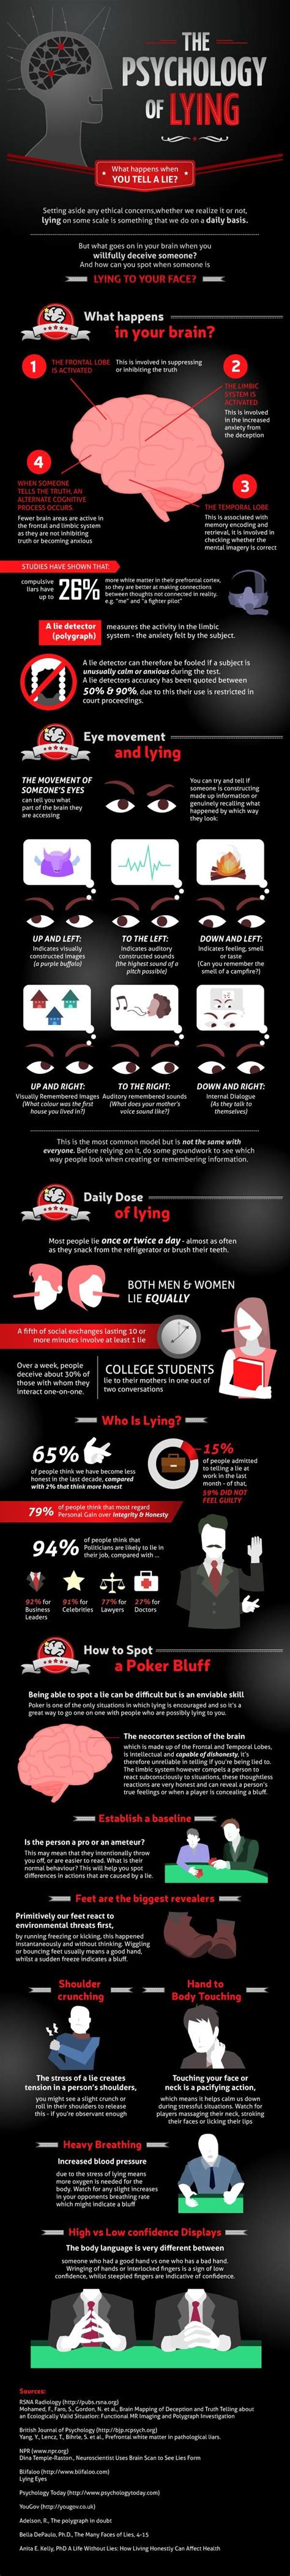 This Infographic Takes A Look At What Happens In Our Brains When We Lie